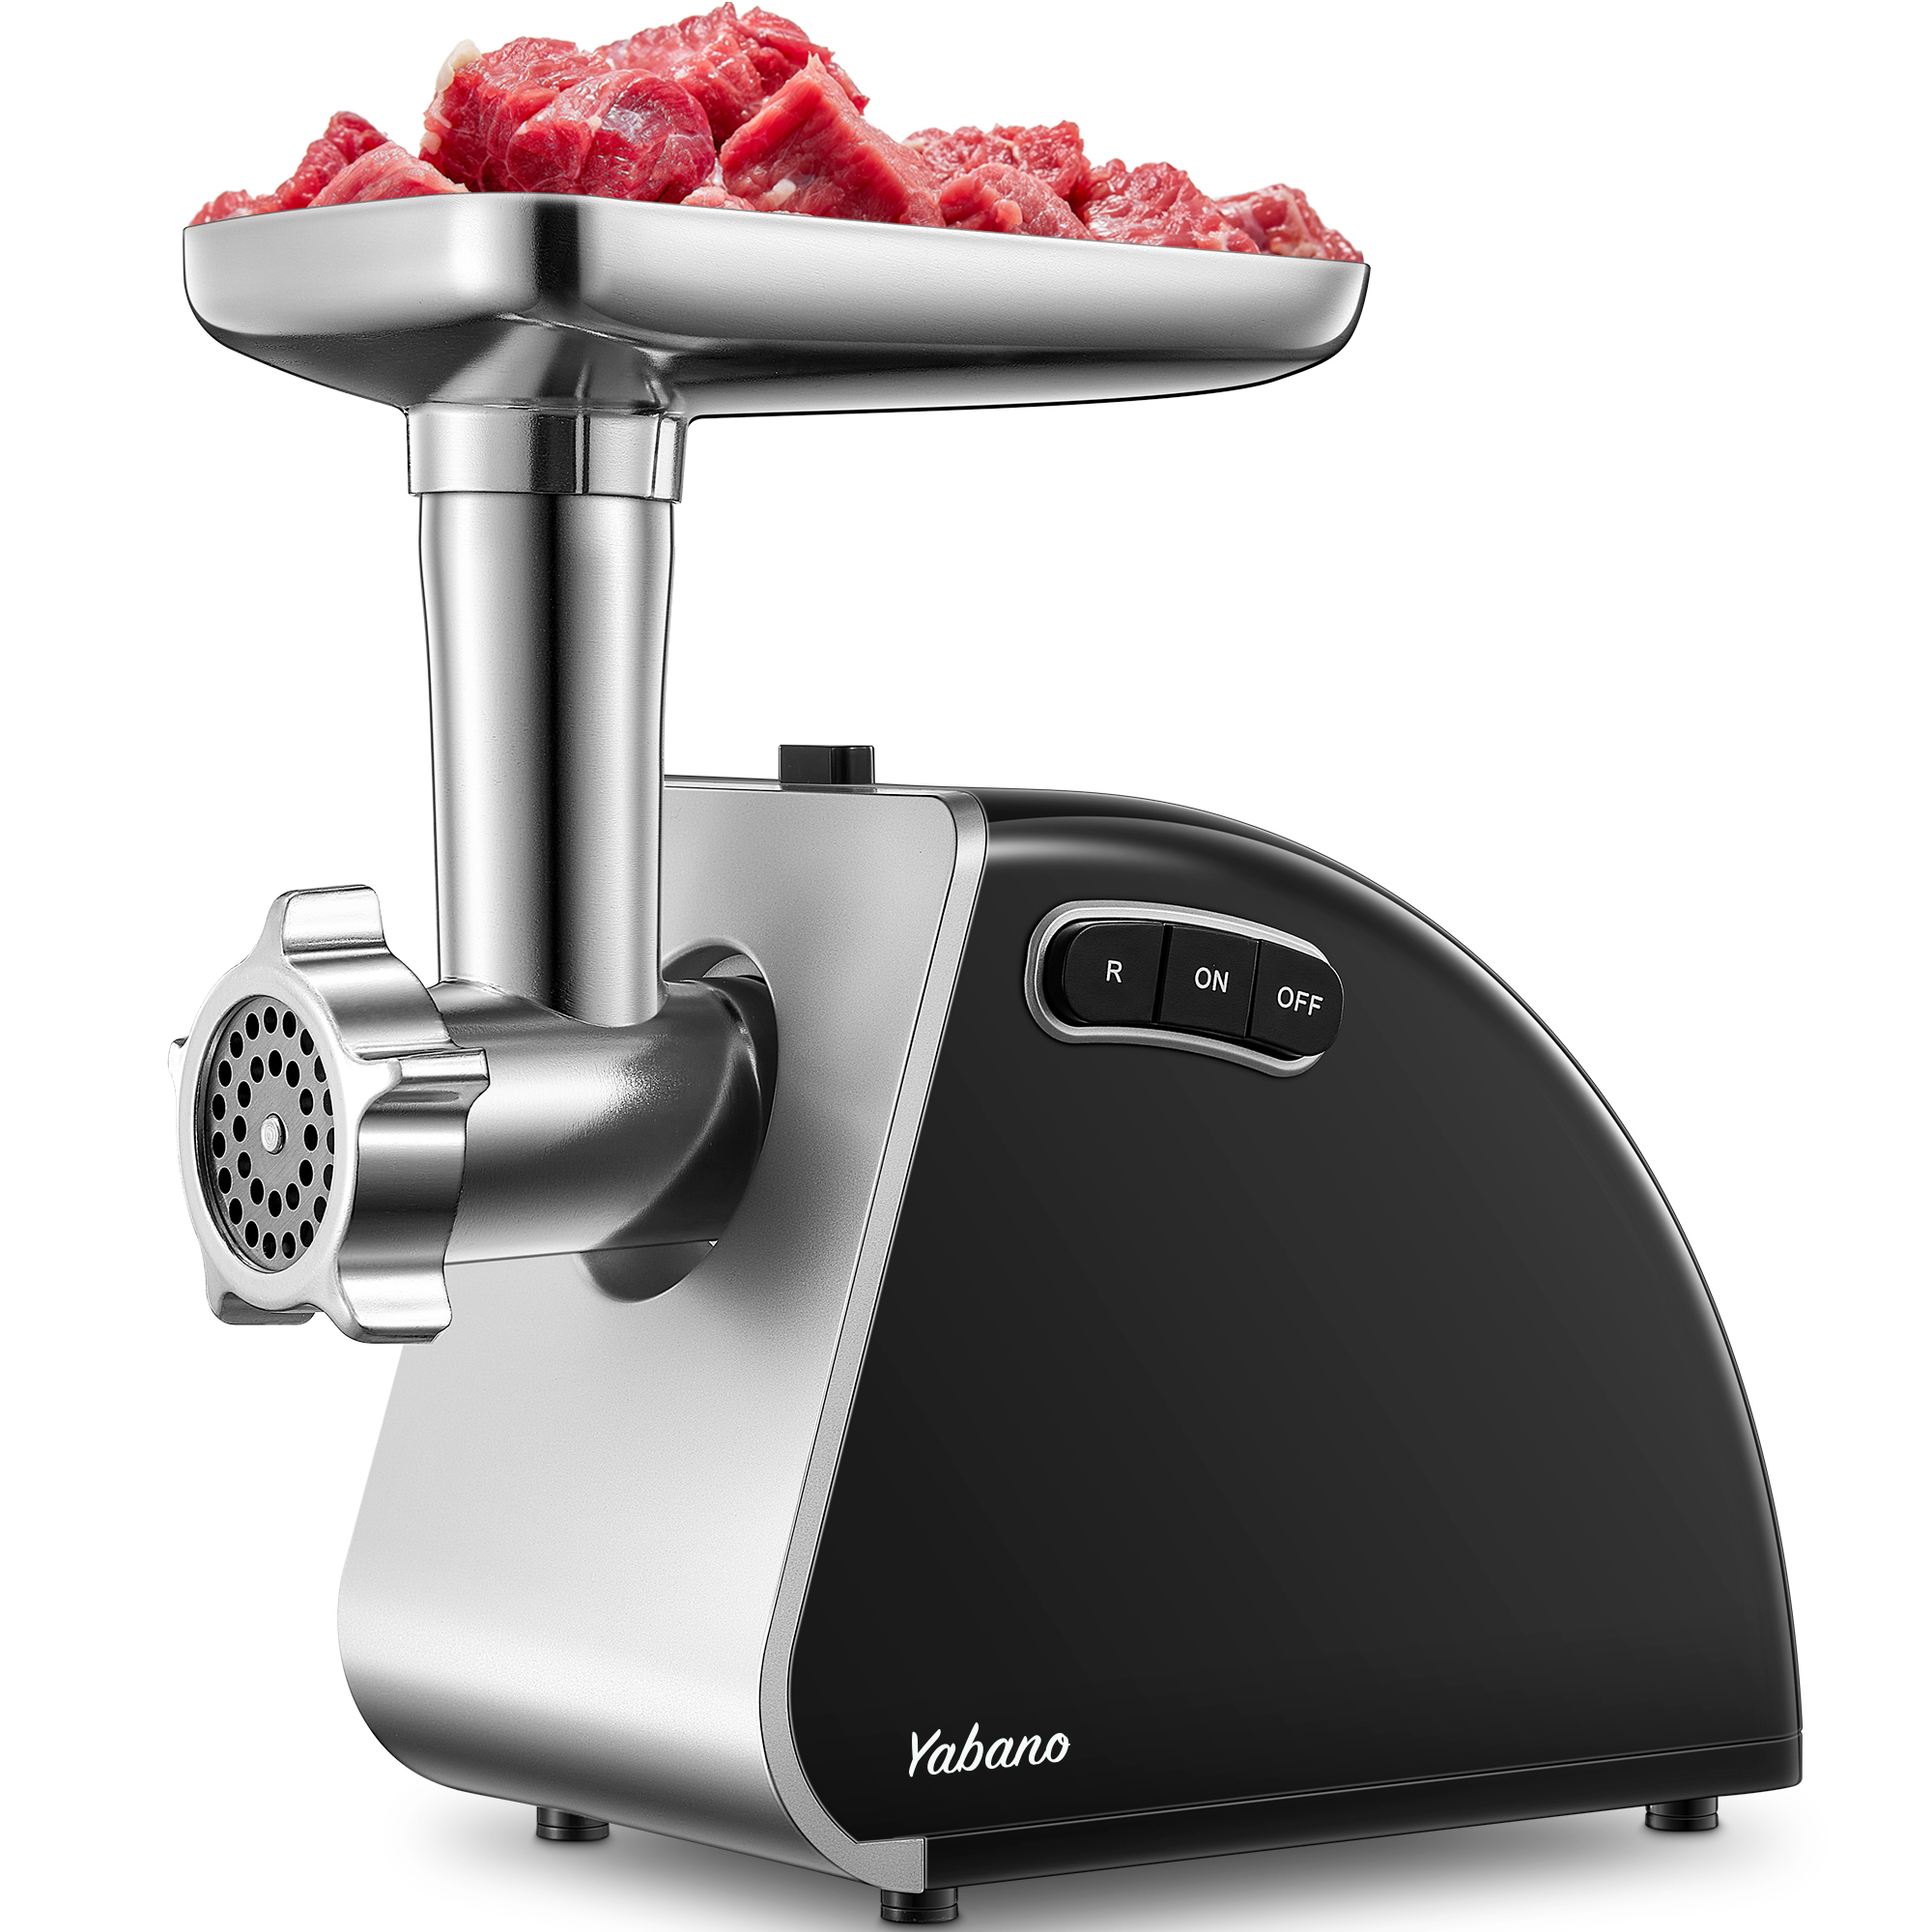 Yabano Electric Meat Grinder 3 IN 1, 1300W Stainless Steel Meat Grinder & Sausage Filler Cutting Plates, Multifunctional Food Processor Meat